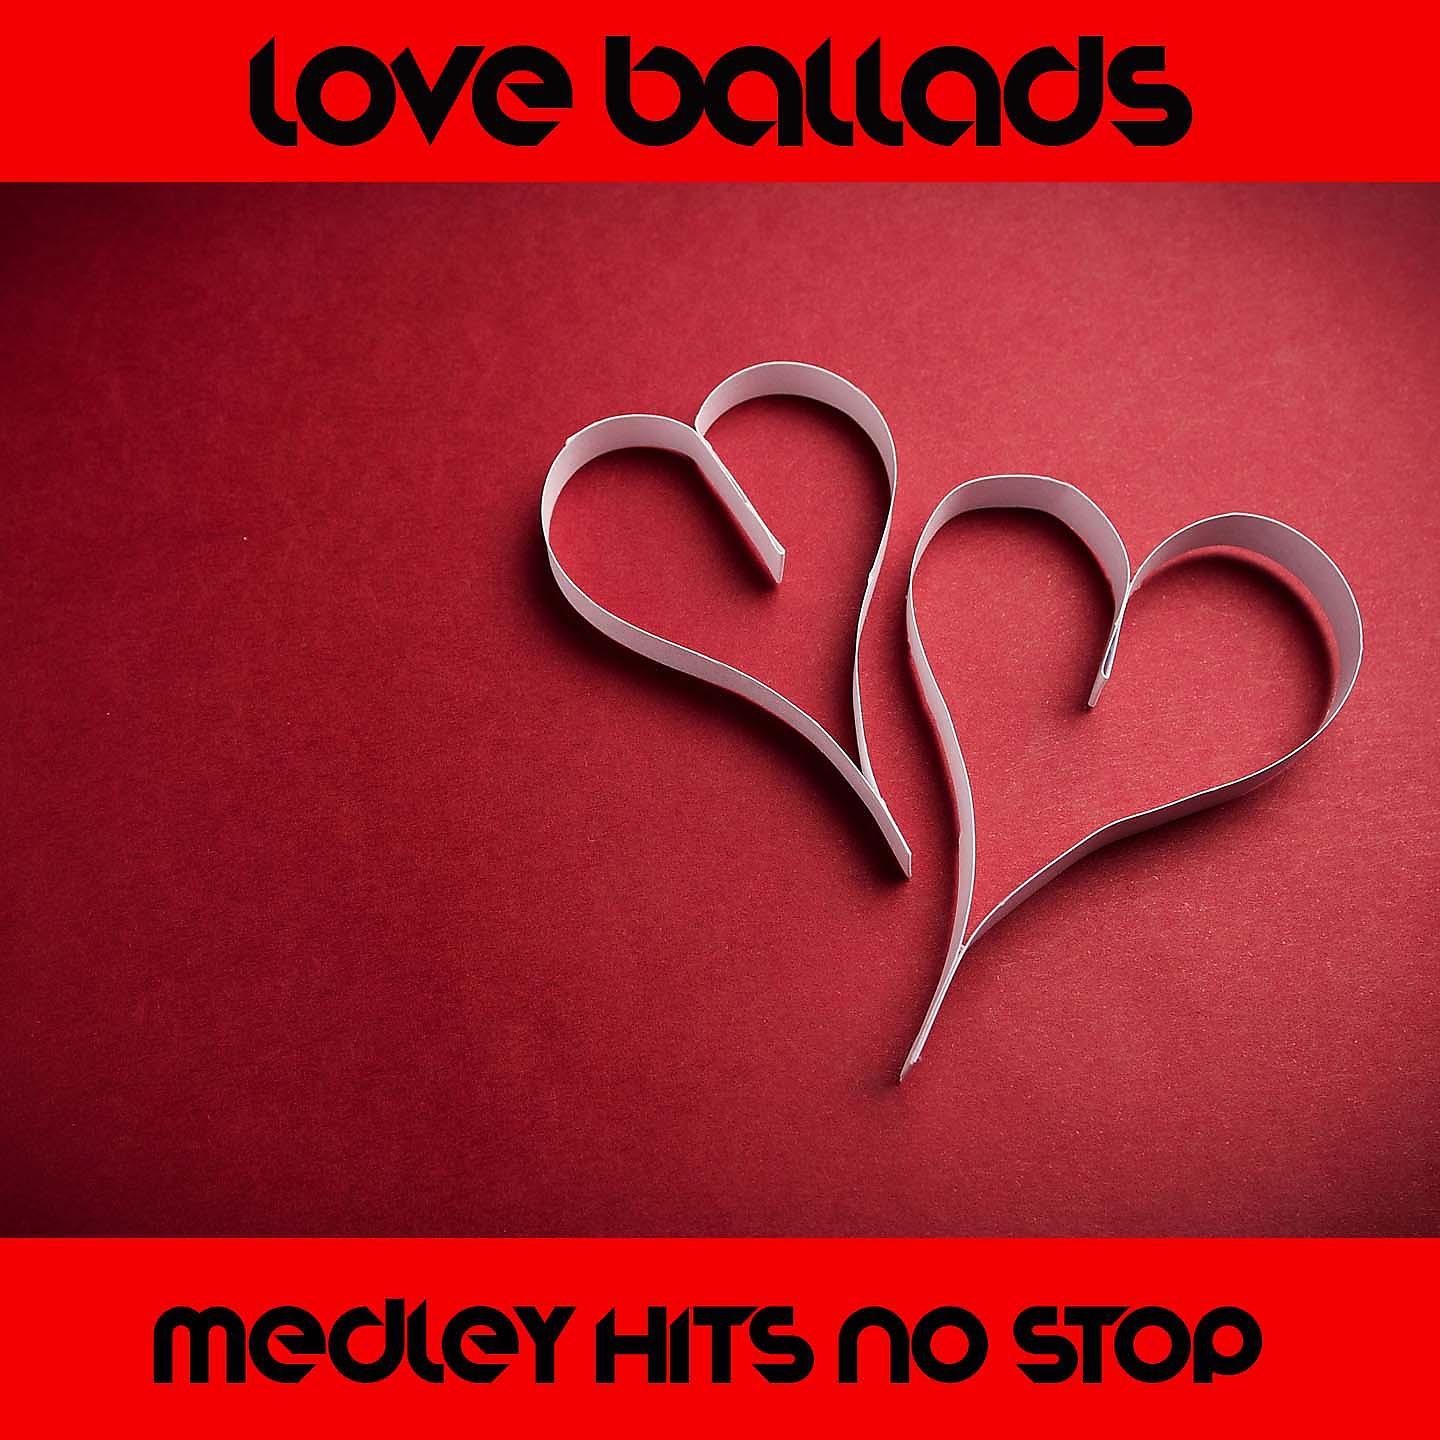 Постер альбома Love Ballads Medley: Why / I Will Always Love You /I Should Have Known Better / We Have All the Time in The World / Do You Know Where You're Going To / For Your Eyes Only / Everytime You Go Away / Baby I Love Your Way / Take My Breath Away / On My Own / L